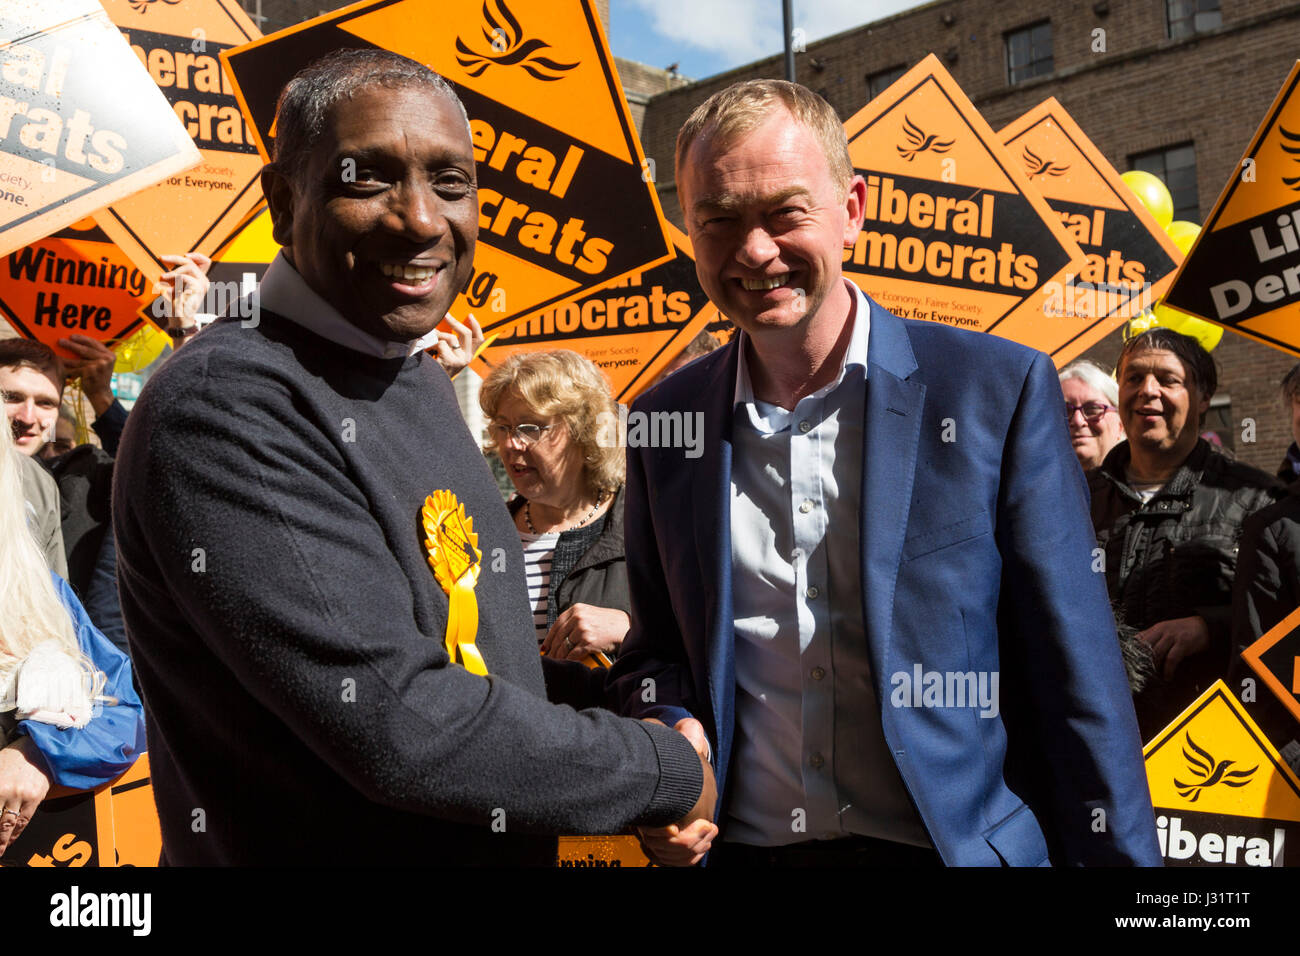 London, UK. 1st May, 2017. Brian Haley with Tim Farron. Tim Farron, Leader of the Liberal Democrats is campaigning alongside North London candidates for the General Election at Hornsey Town Hall in Crouch End. Credit: Vibrant Pictures/Alamy Live News Stock Photo